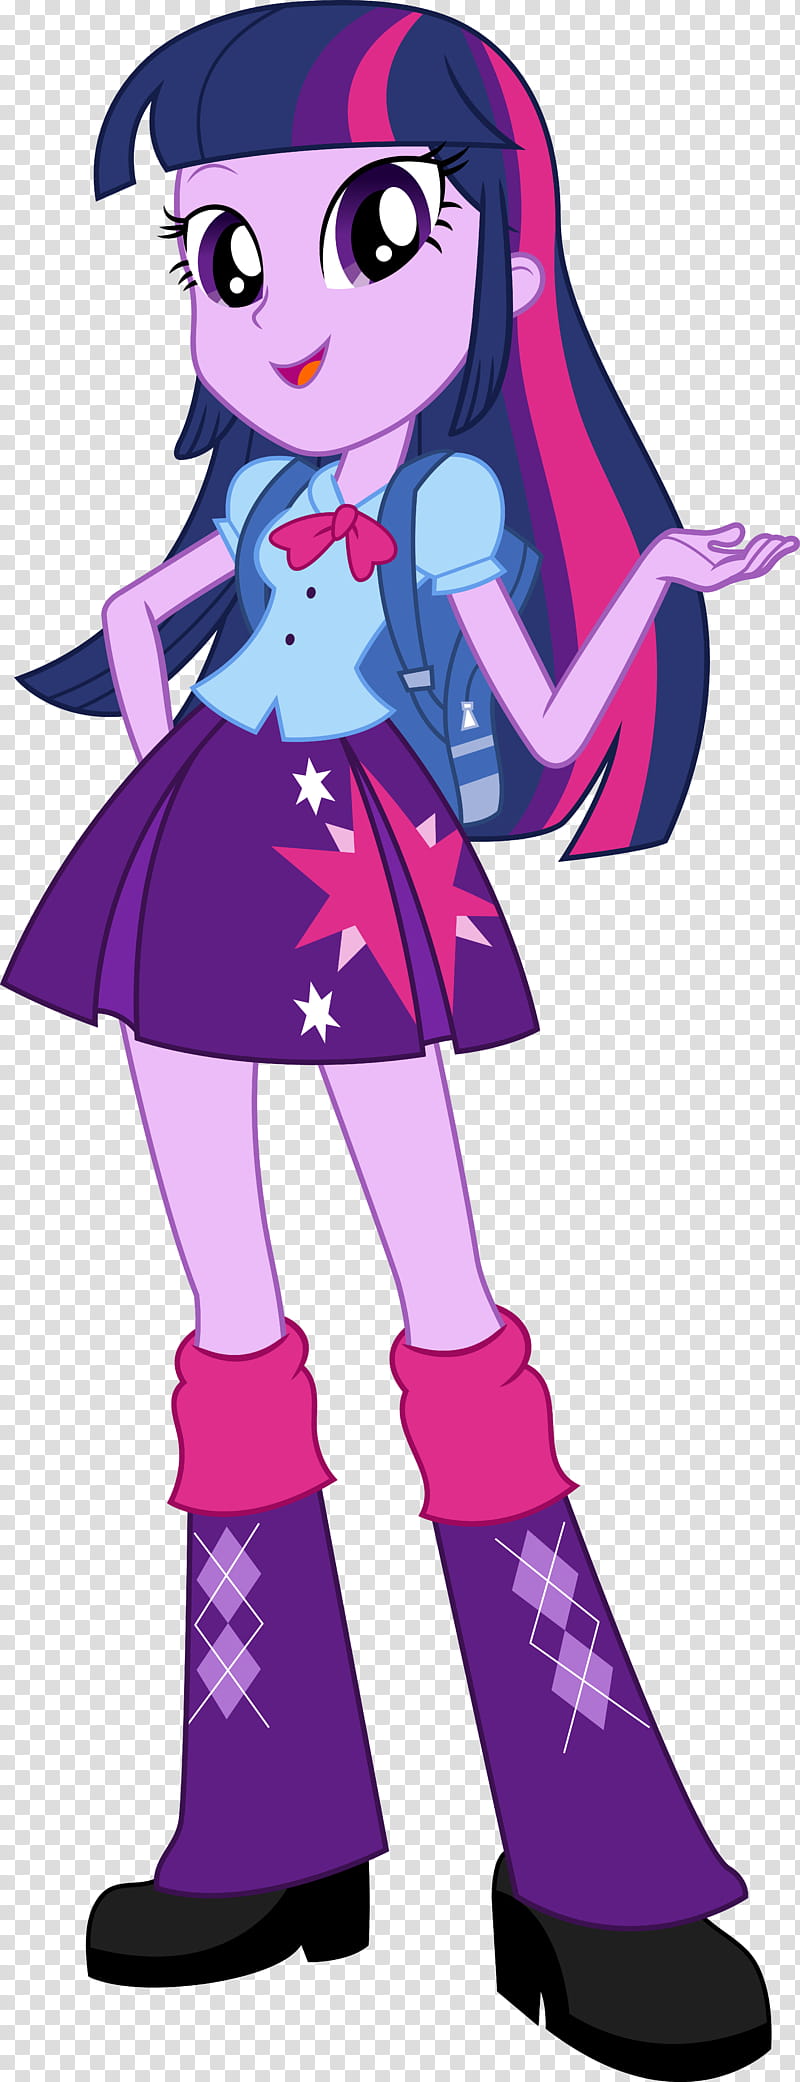 Equestria Girls Twilight Sparkle, purple haired anime character transparent  background PNG clipart | HiClipart